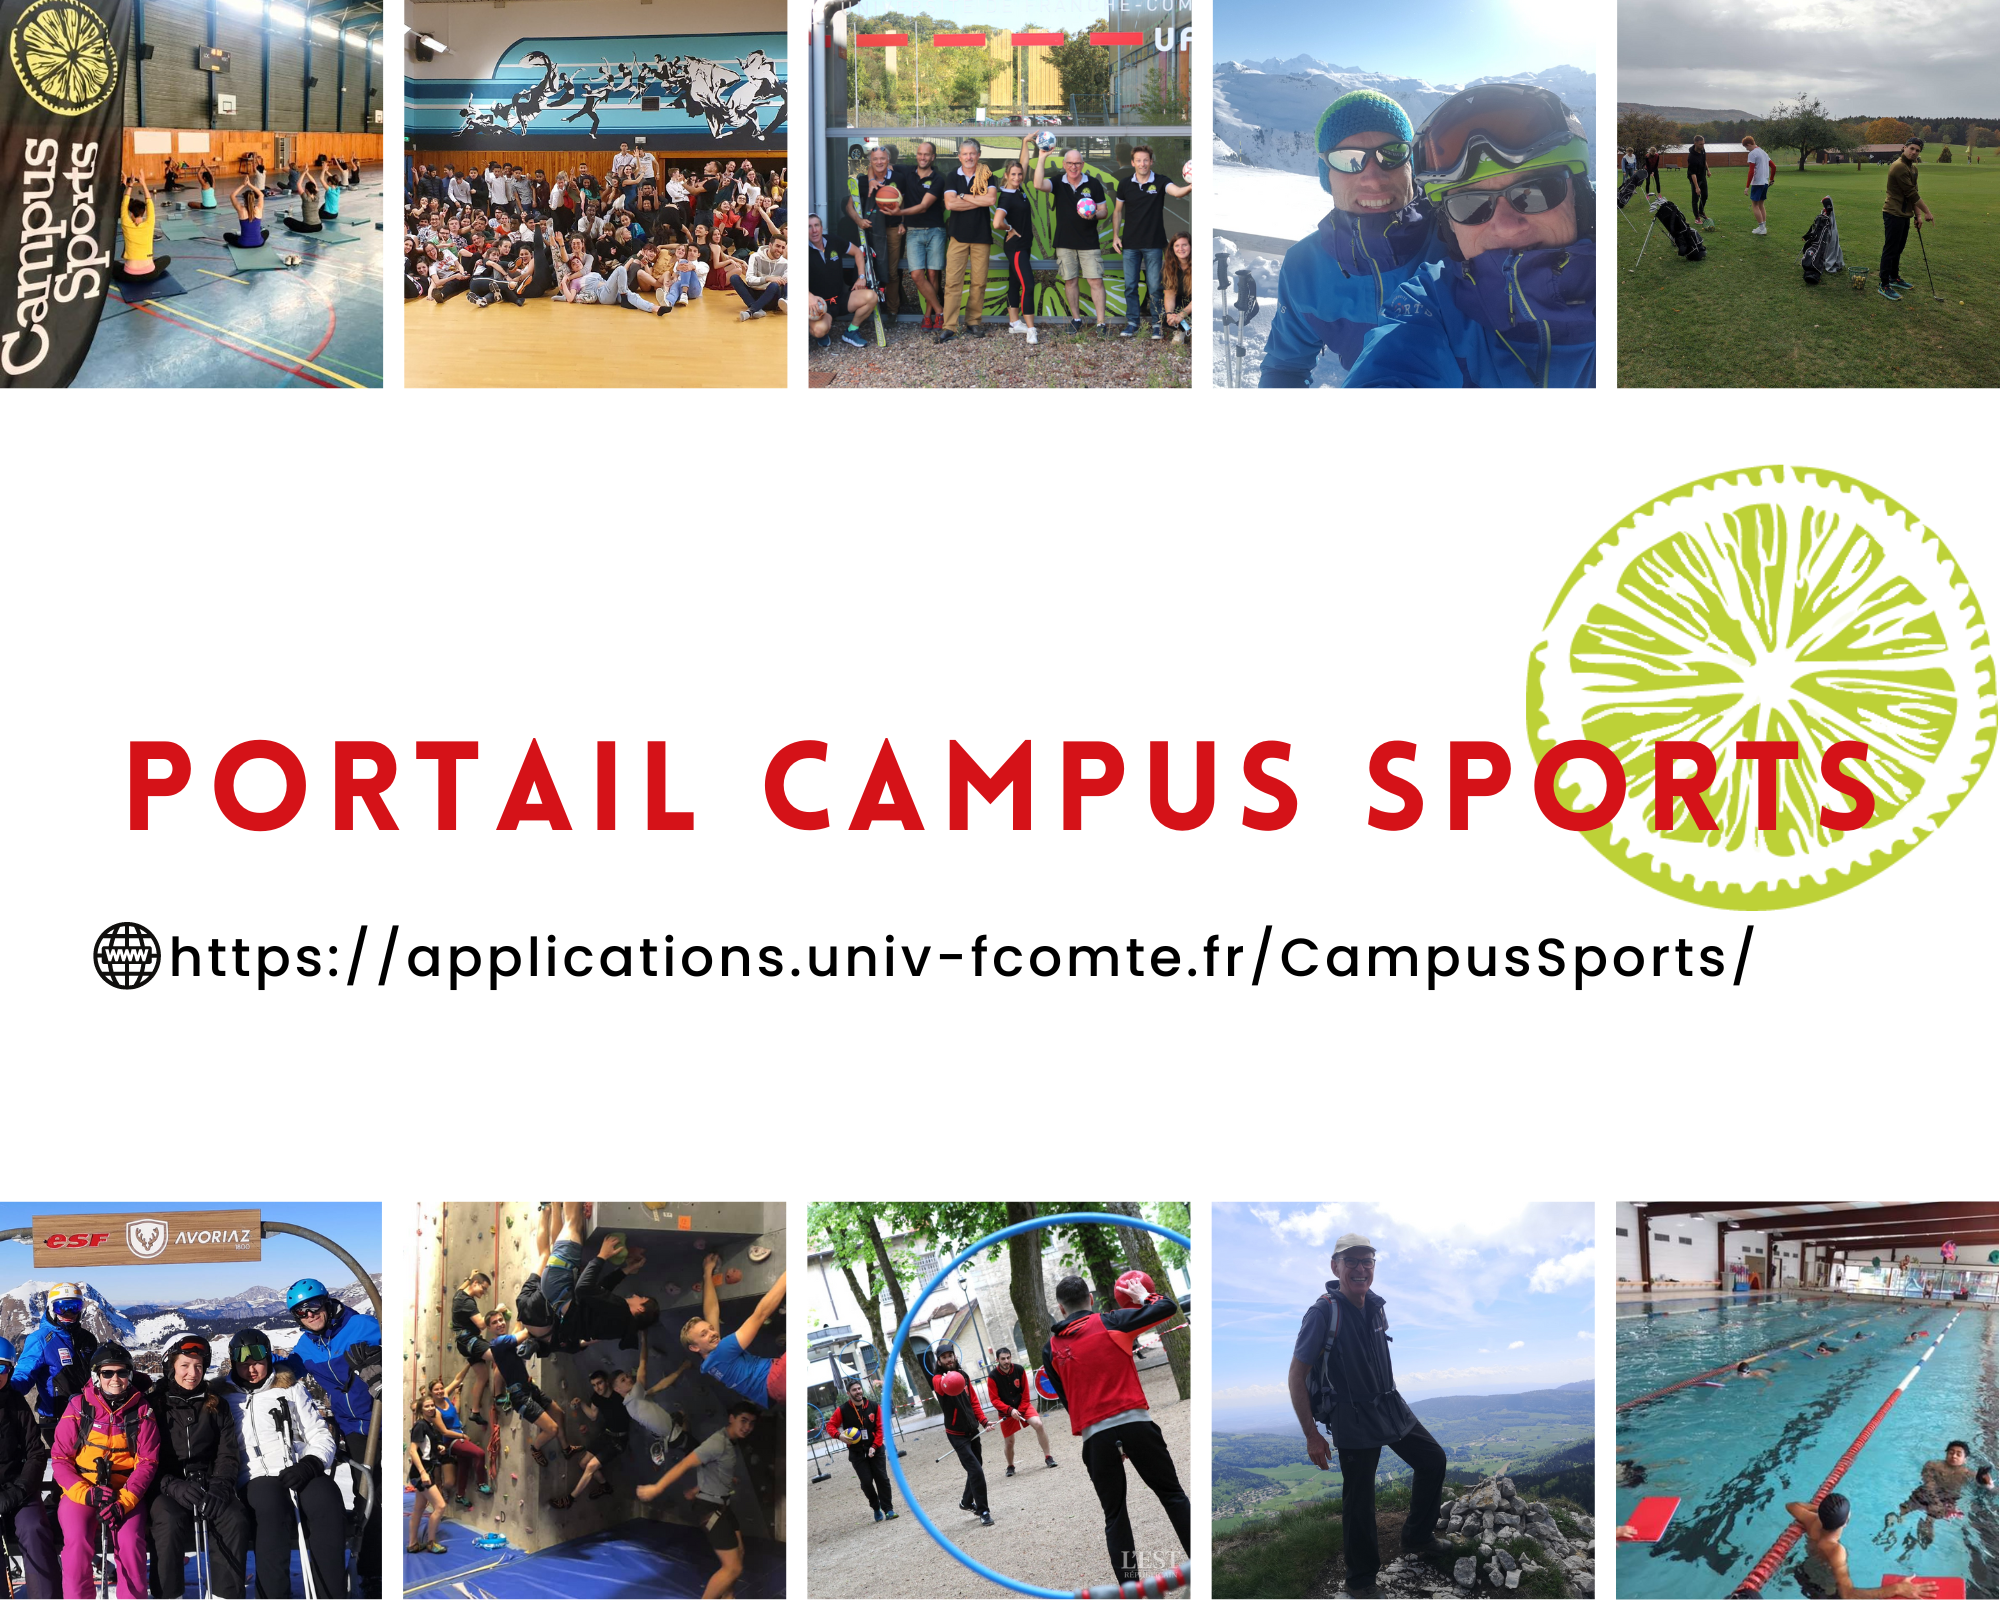 Portail Campus Sports